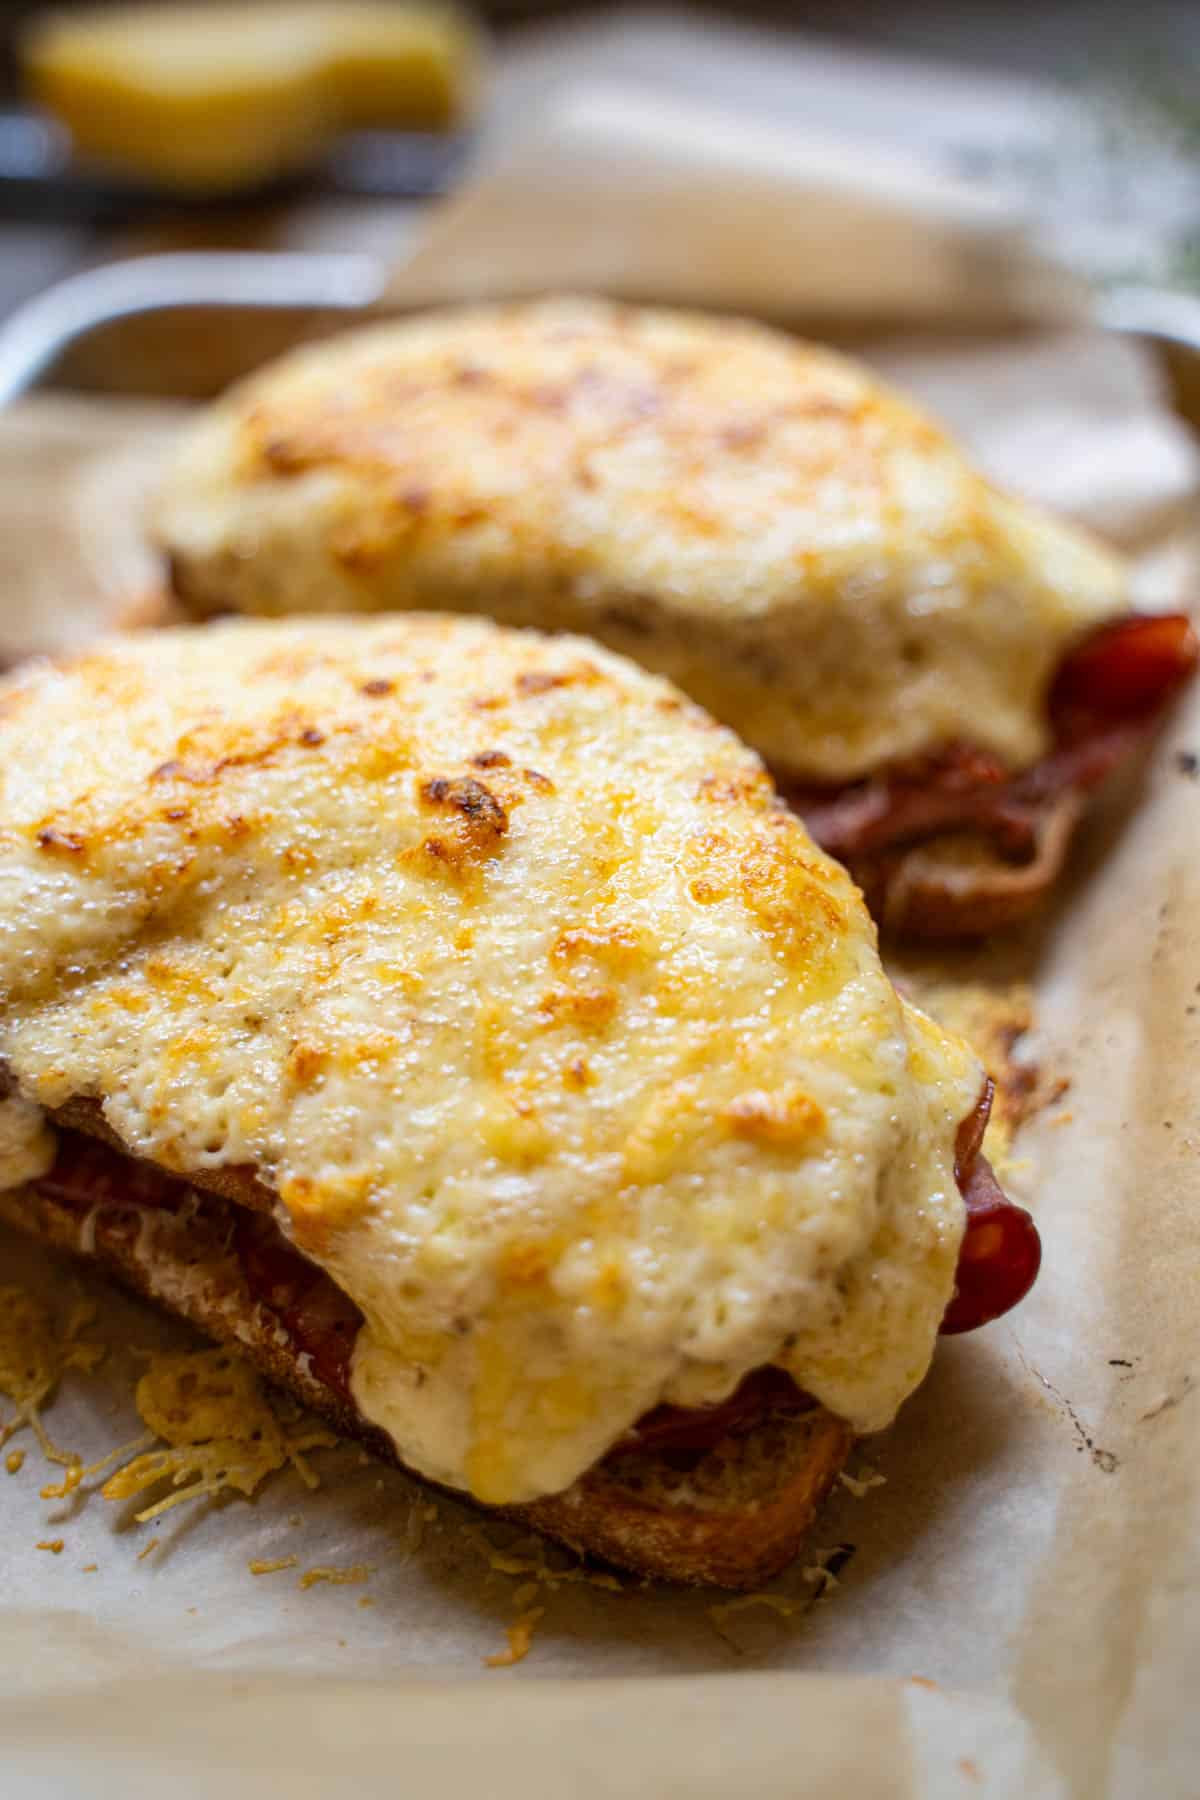 2 Croque Monsieur Sandwiches baked on a baking sheet lined with parchment